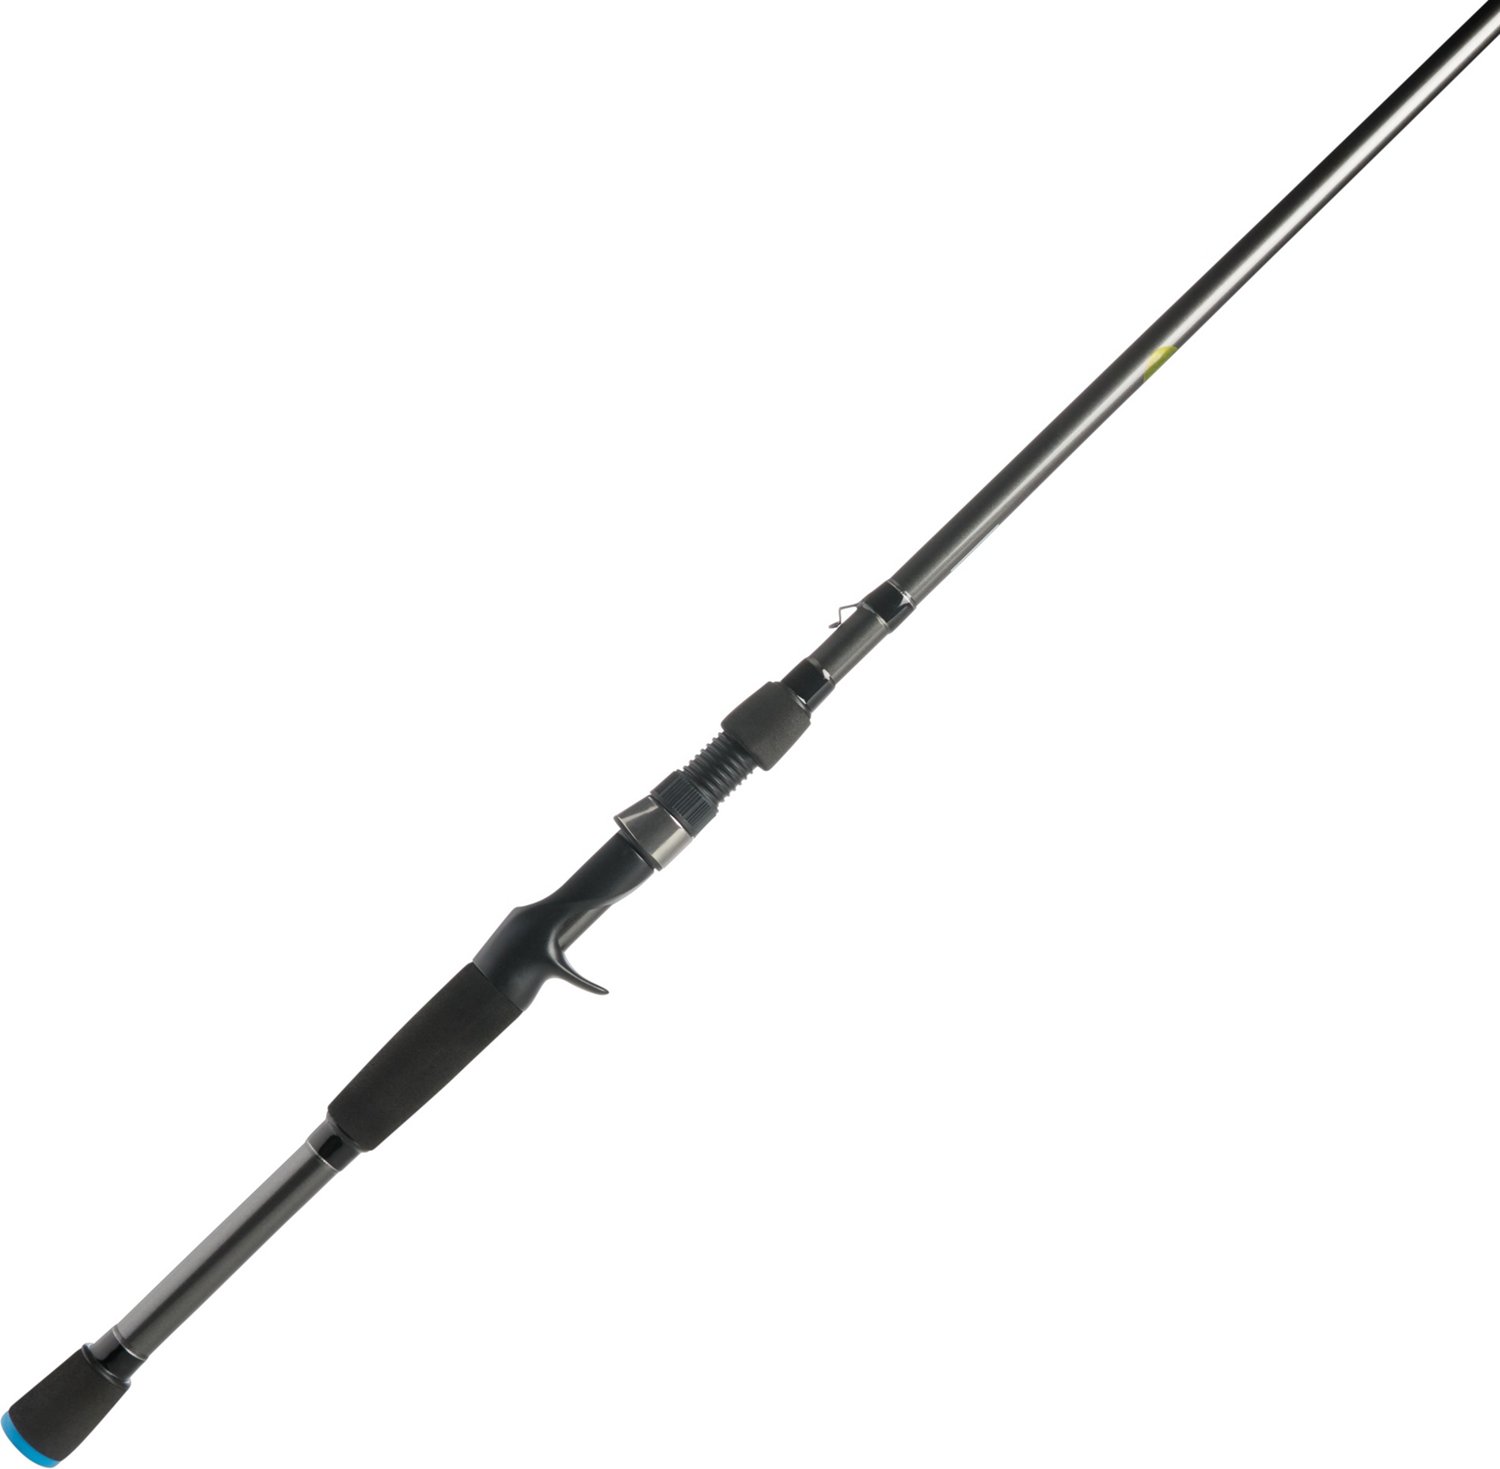 Portable Baitcasting Fishing Rods Spinning and Casting Rod,Carbon